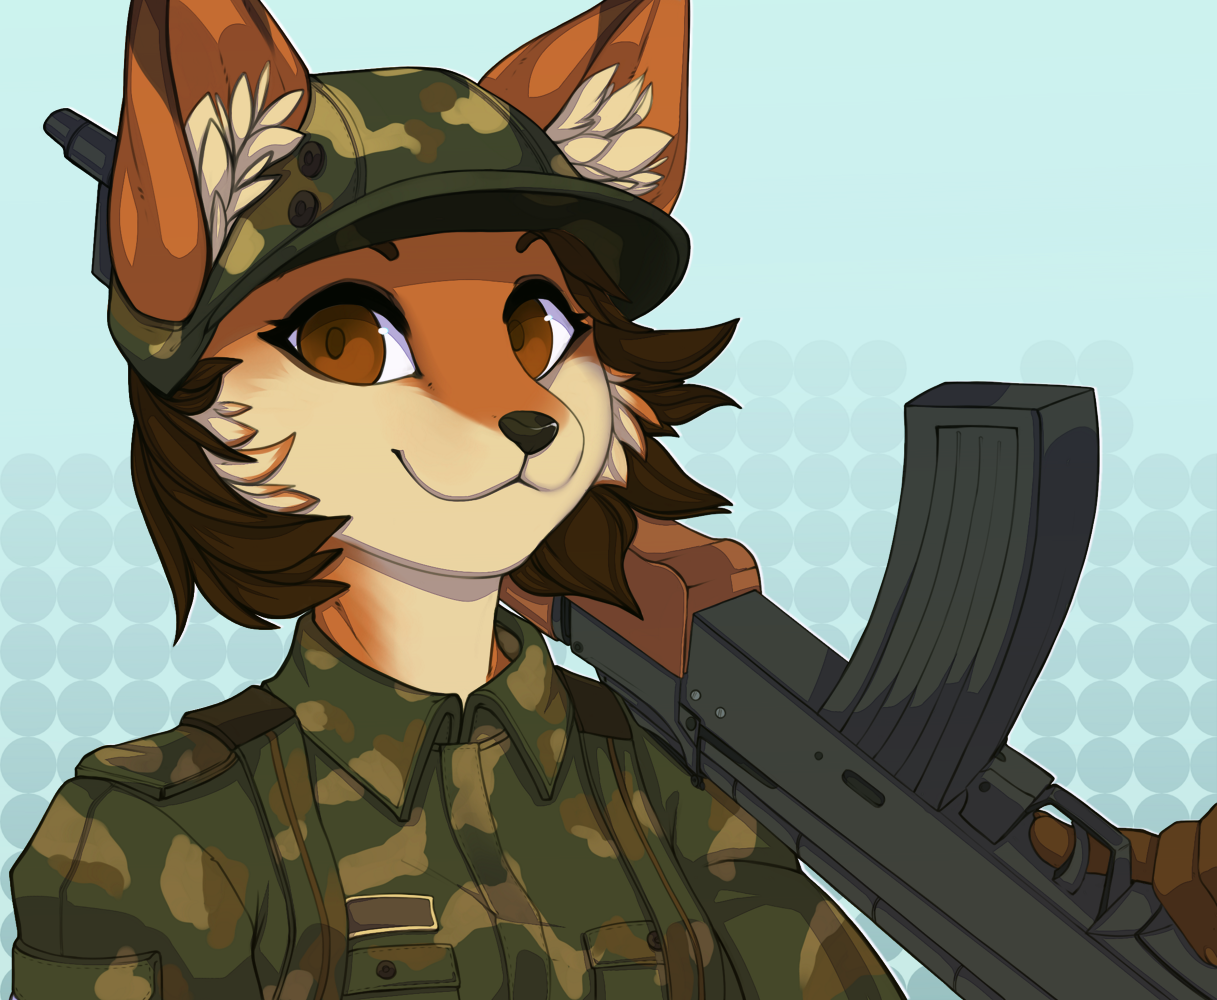 Furries in the military 🔥 Furries in the army now - YouTube